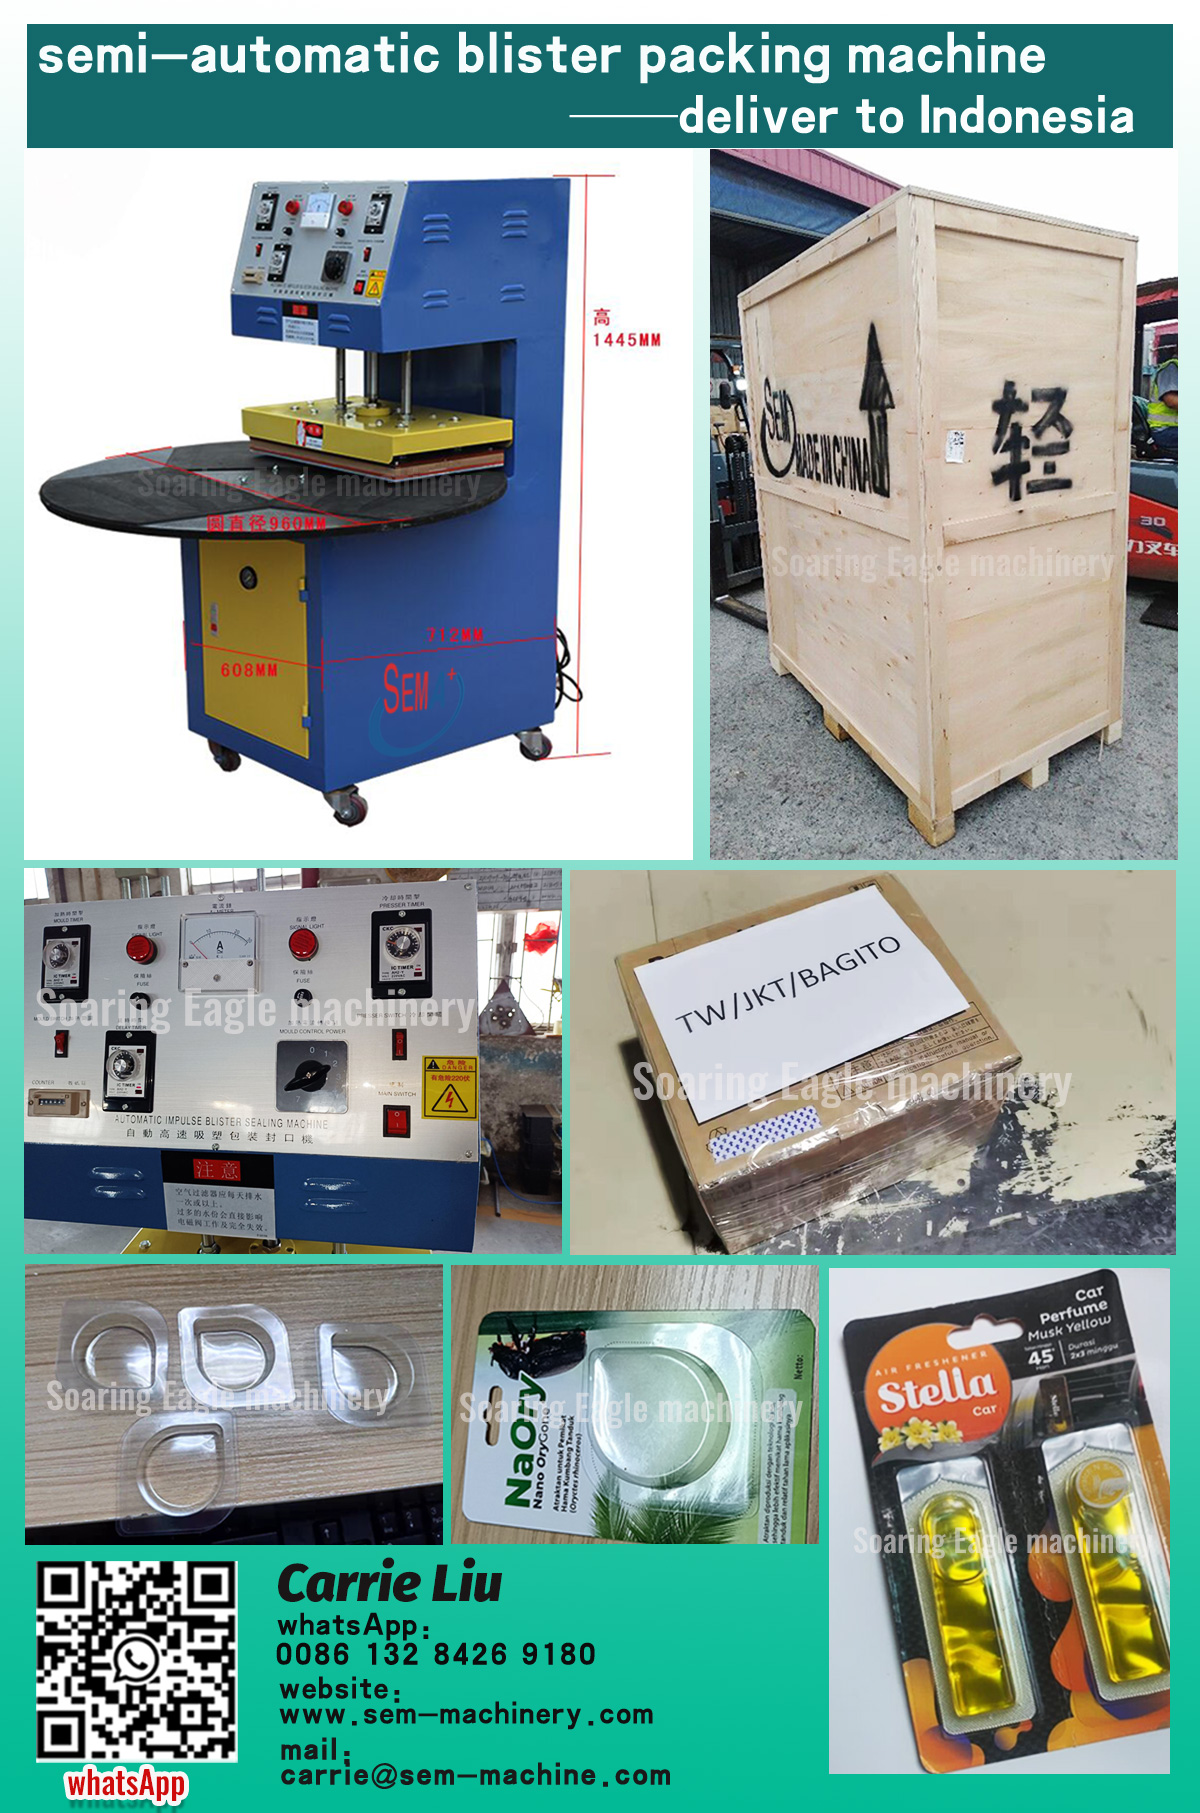 Semi-Automatic blister packing machine—delivered to Indonesia